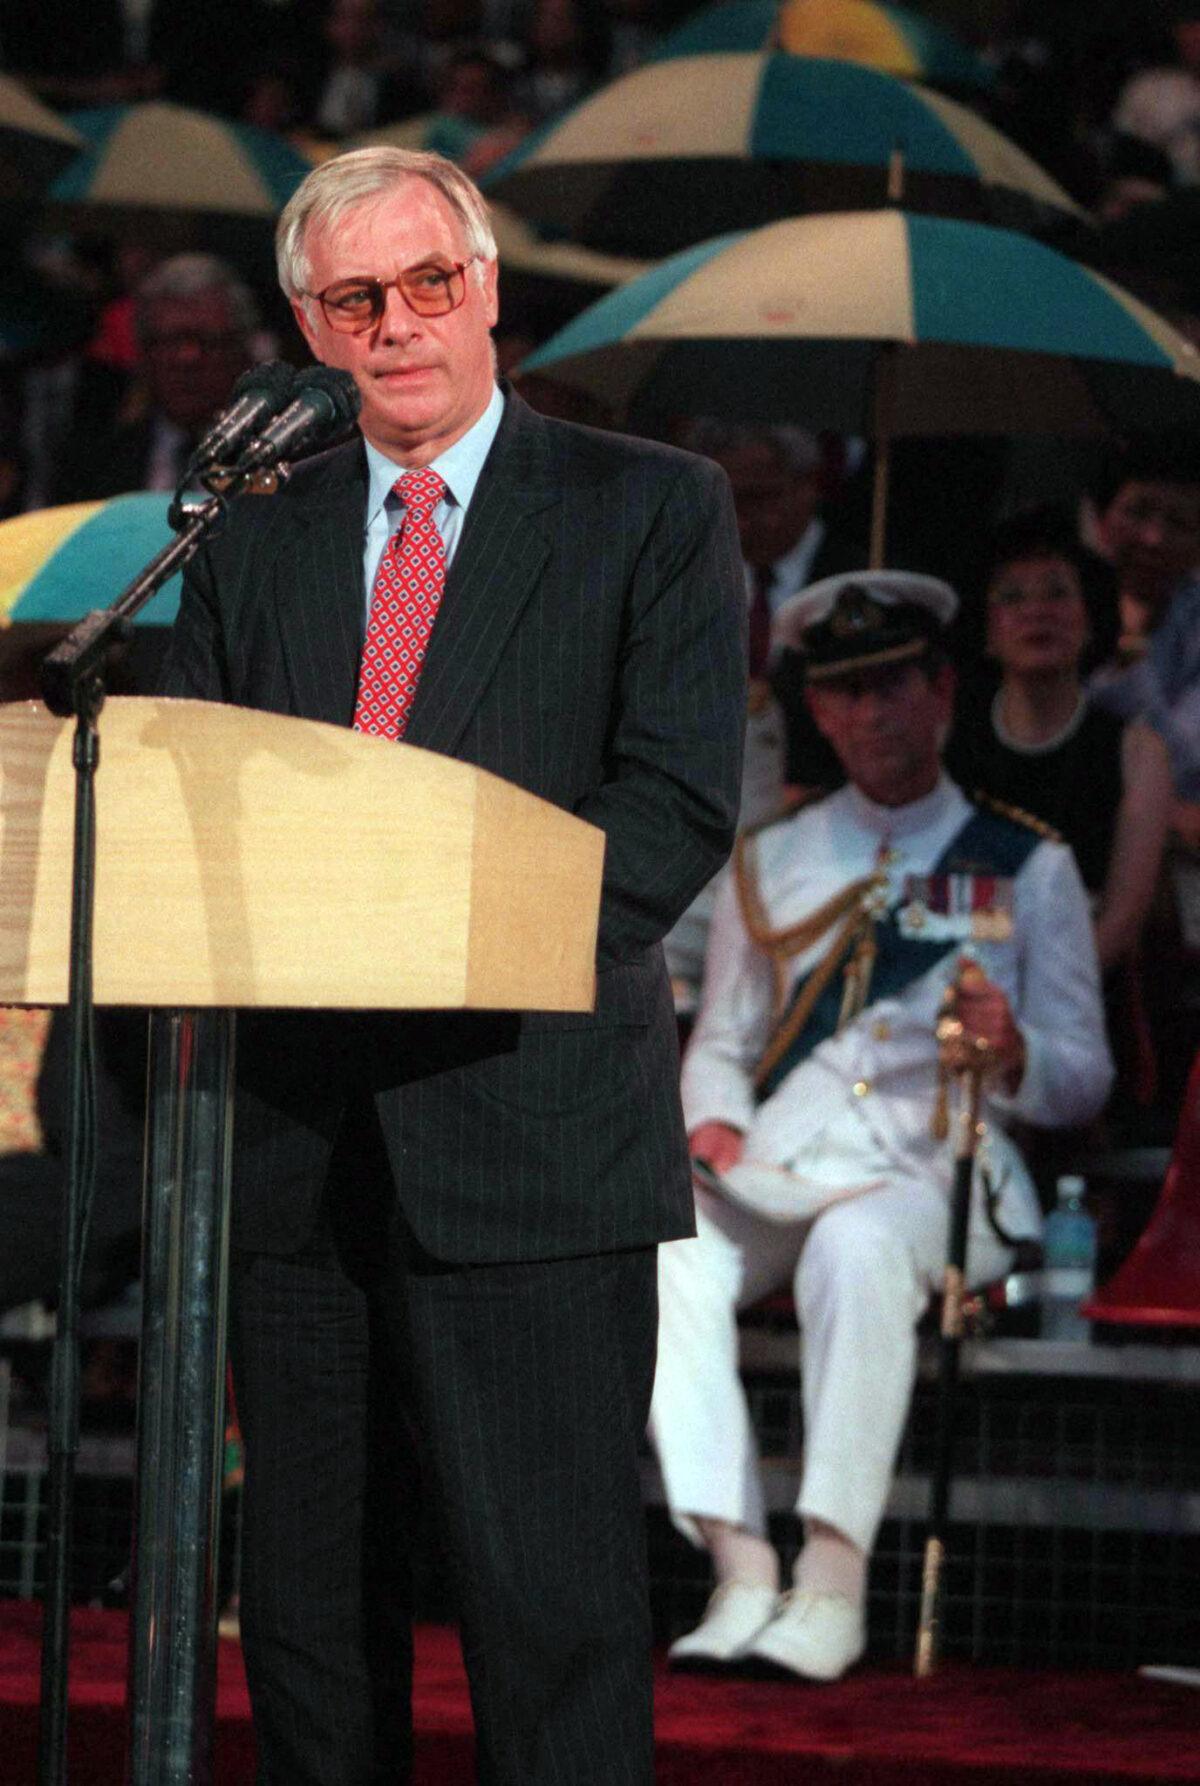 Chris Patten delivers his farewell speech at the British Handover Ceremony, while Prince Charles looks on 30 June. AFP PHOTO POOL/Mike Fiala (Photo by Mike FIALA / POOL / AFP)